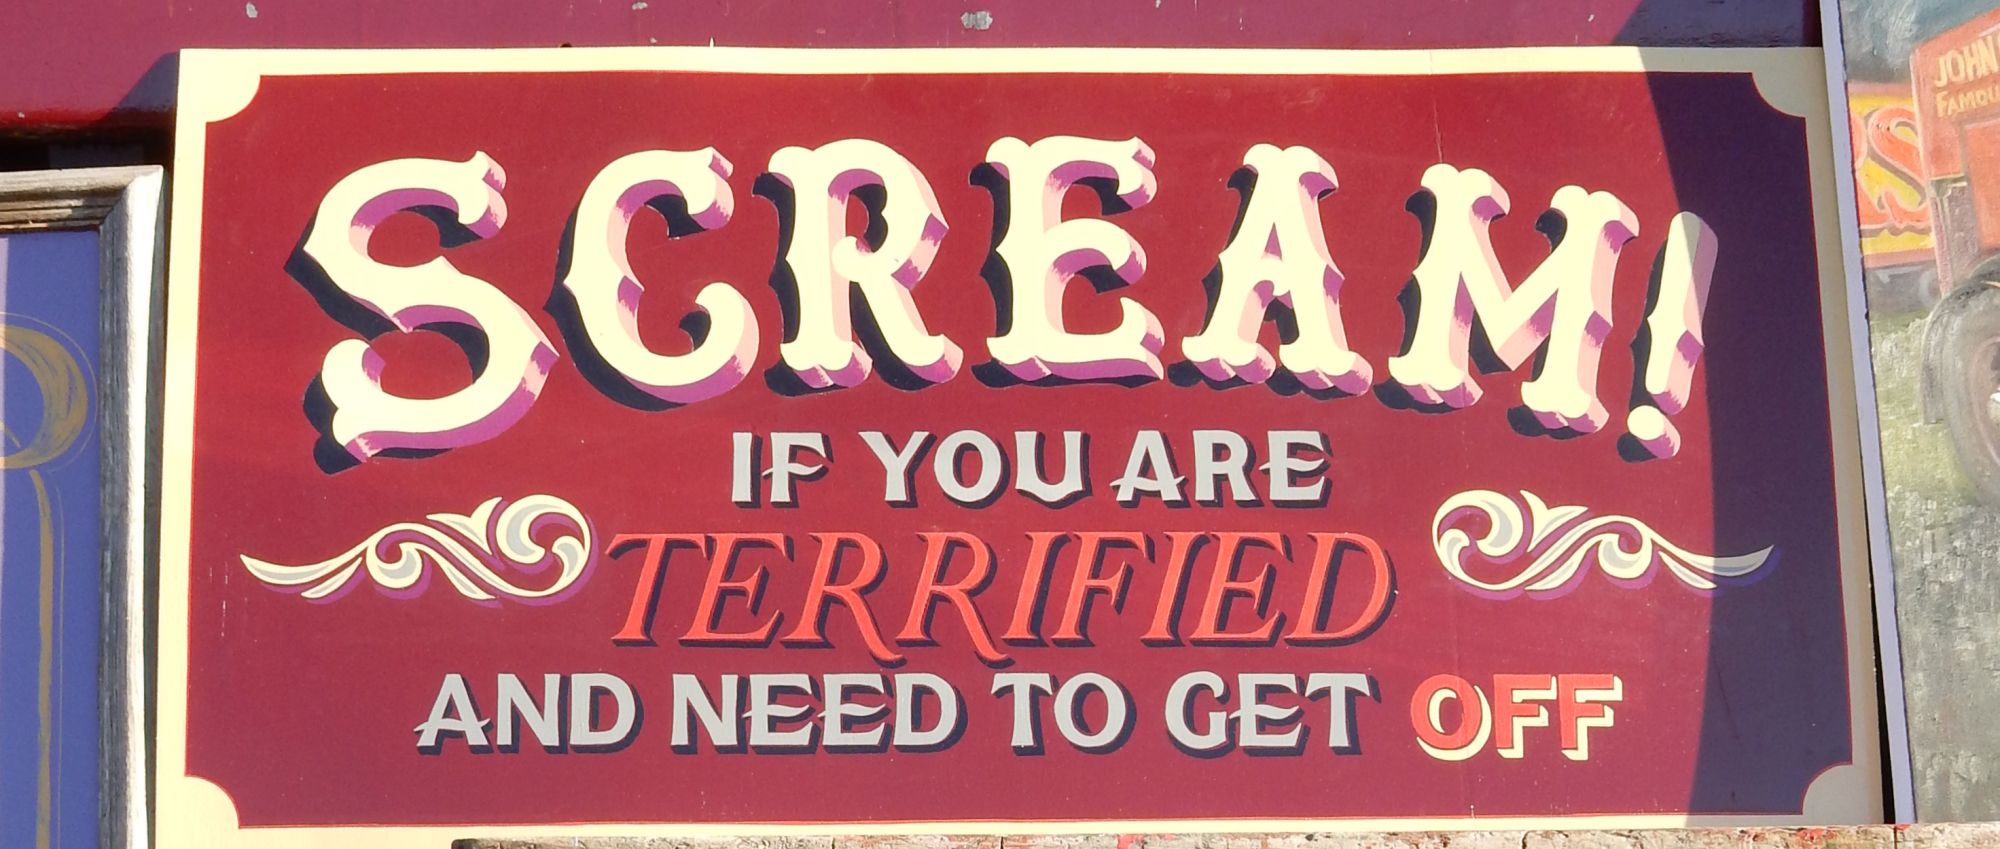 Hand-painted sign that says 'Scream! if you are terrified and need to get off'.